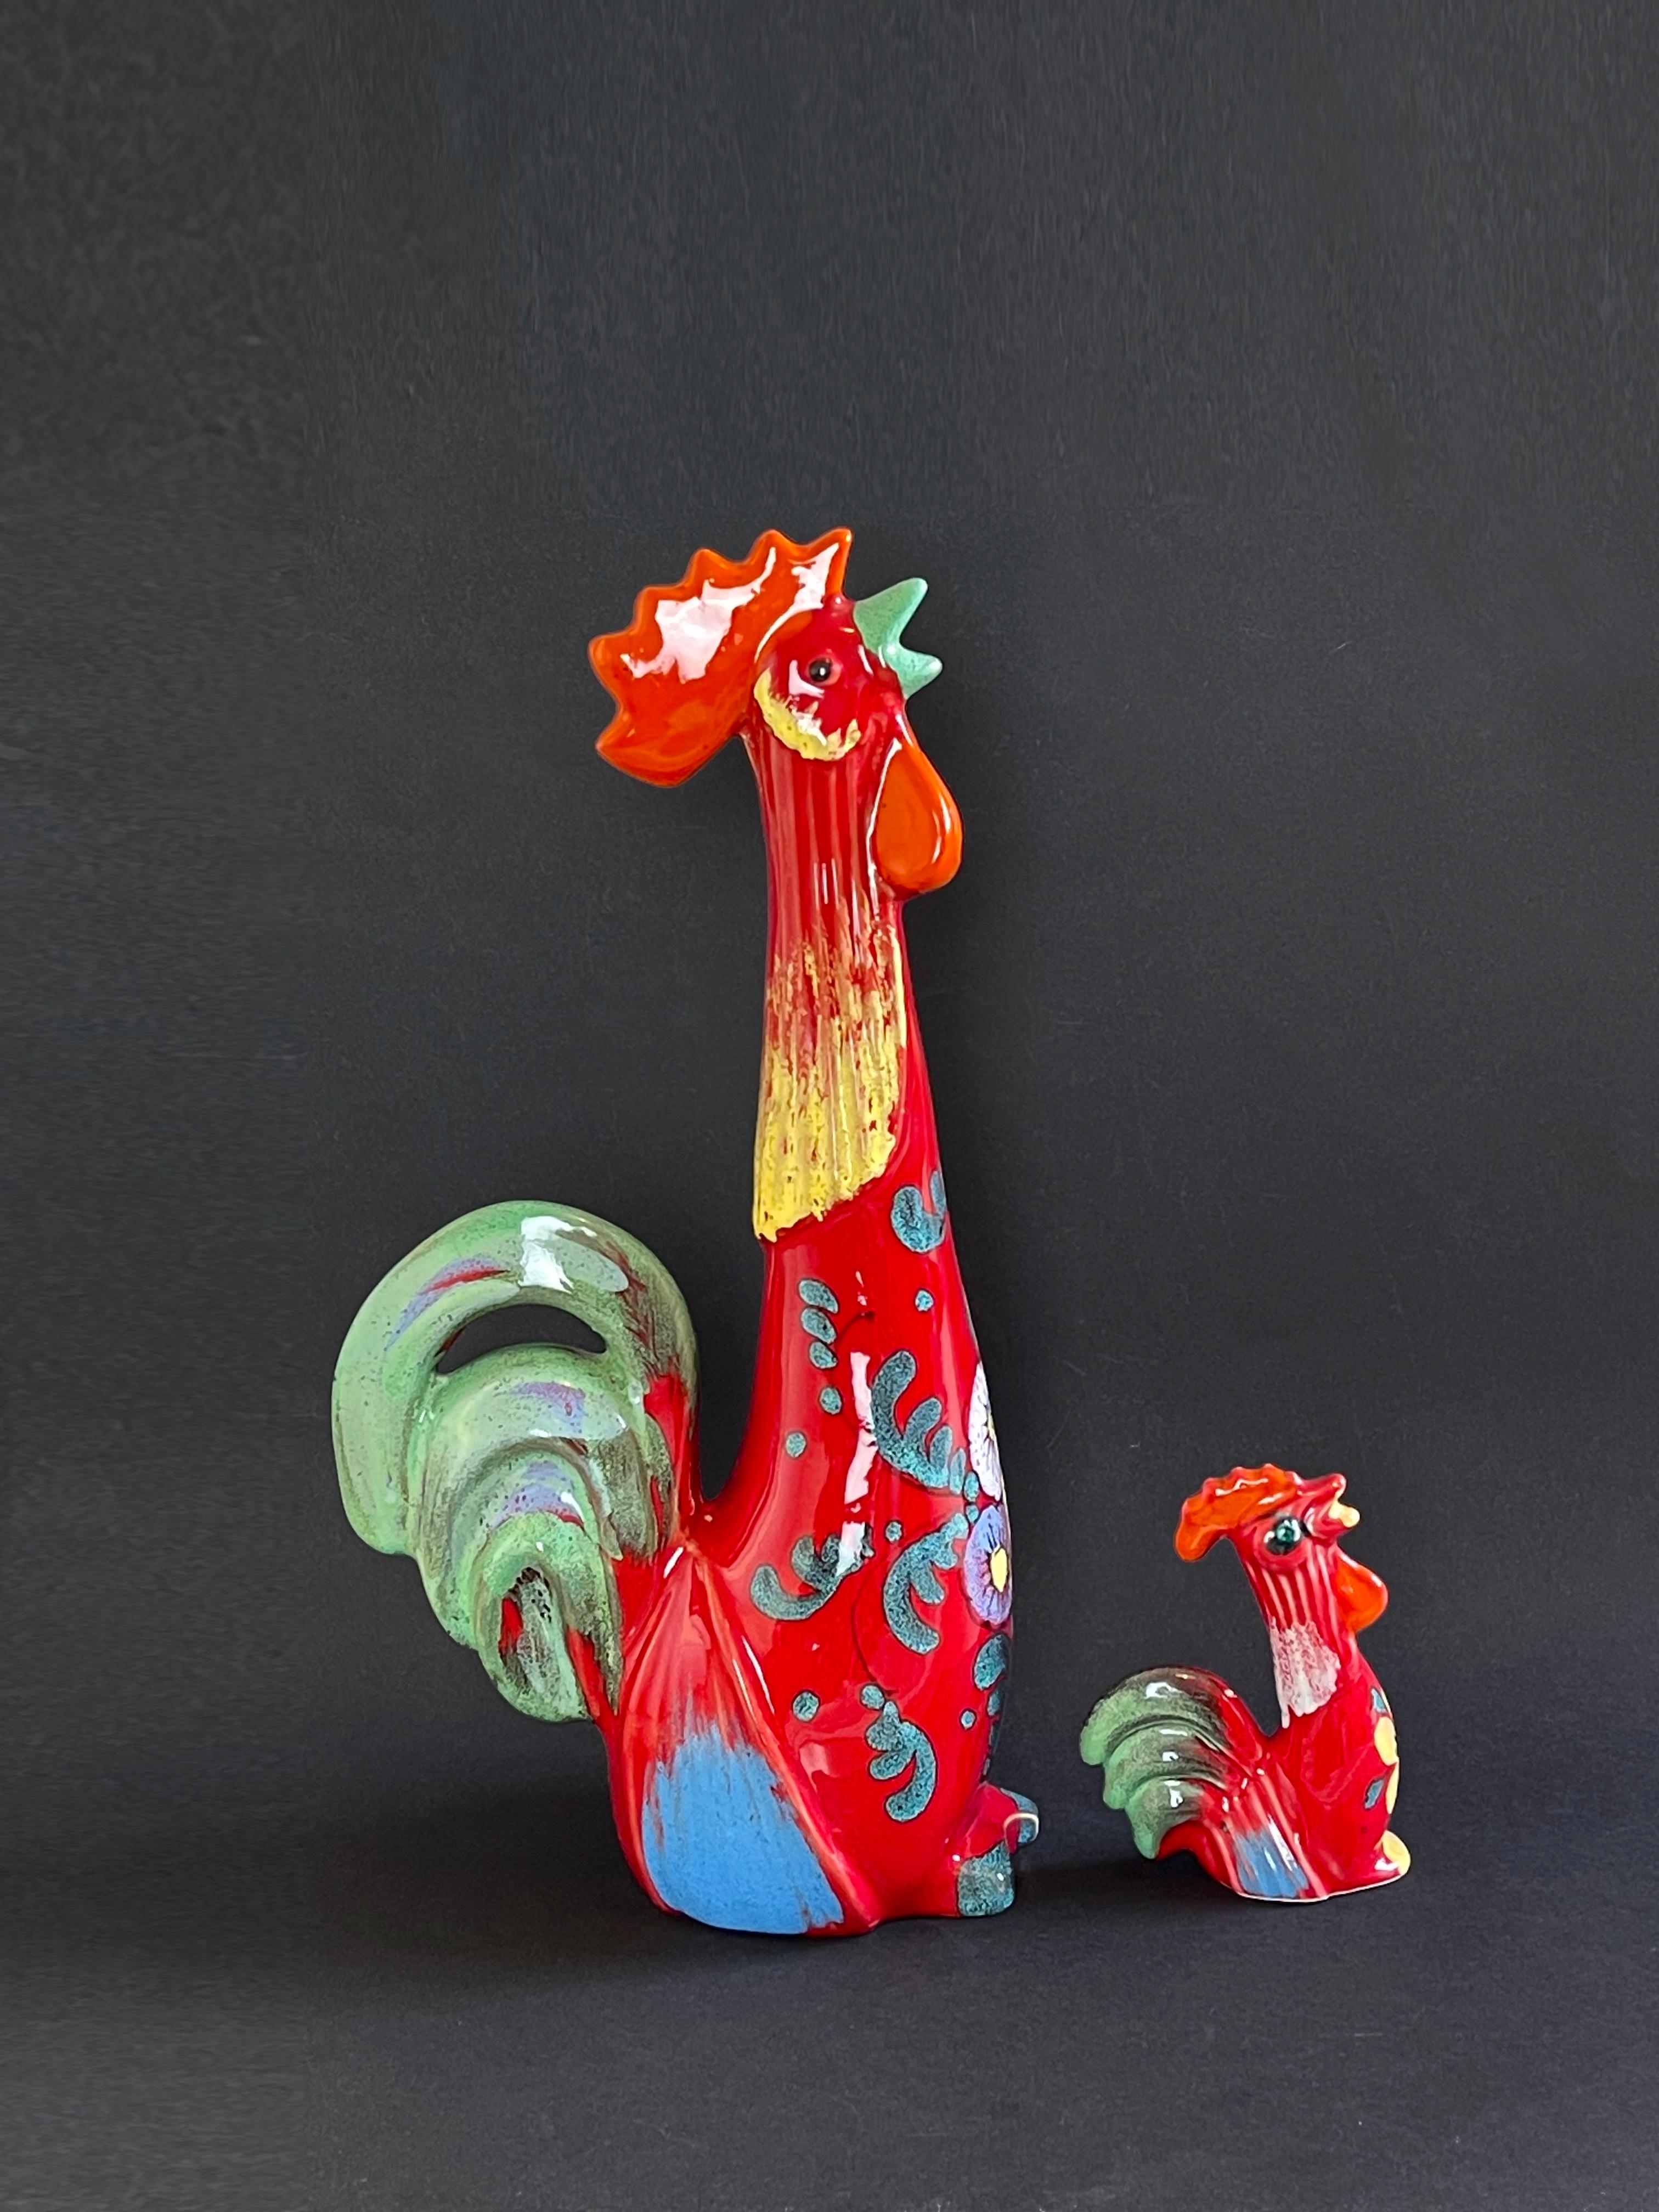 Funky Fat Lava style pair of roosters in a fiery red: mid-century ceramic figurines.
Very colourful fun glaze in the typical mid-century colour palette.
Made from light ceramic, gorgeously shaped elongated and stylized birds crowing from the top of